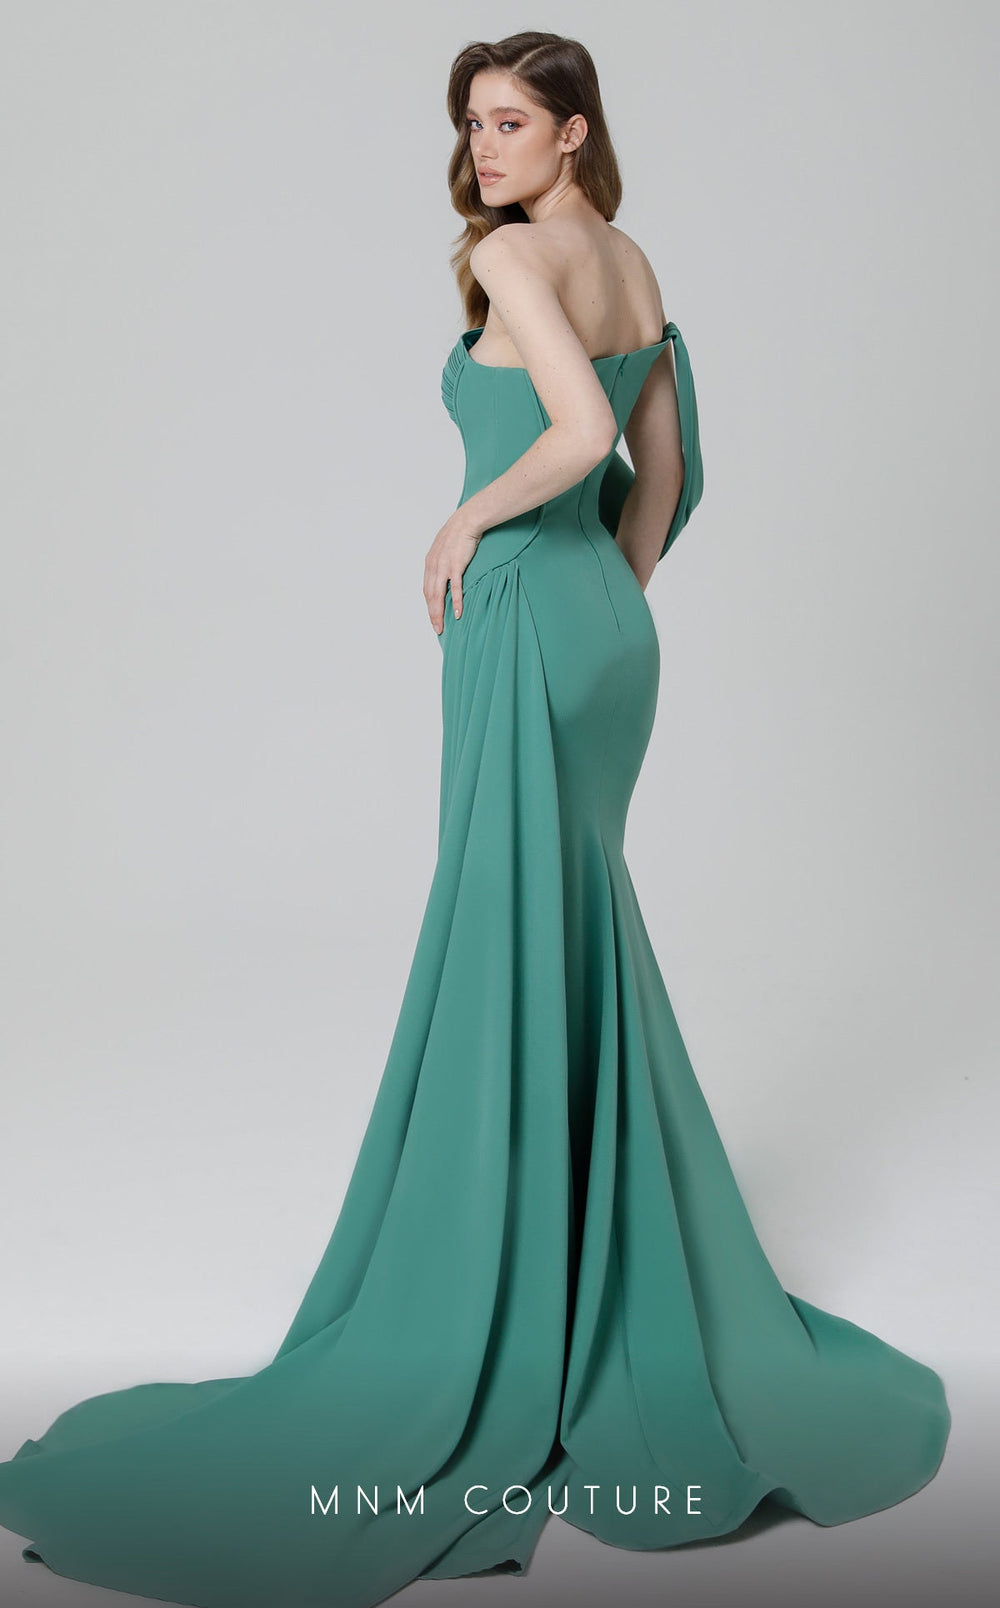 Mnm Couture Evening Dress MNM Couture N0473